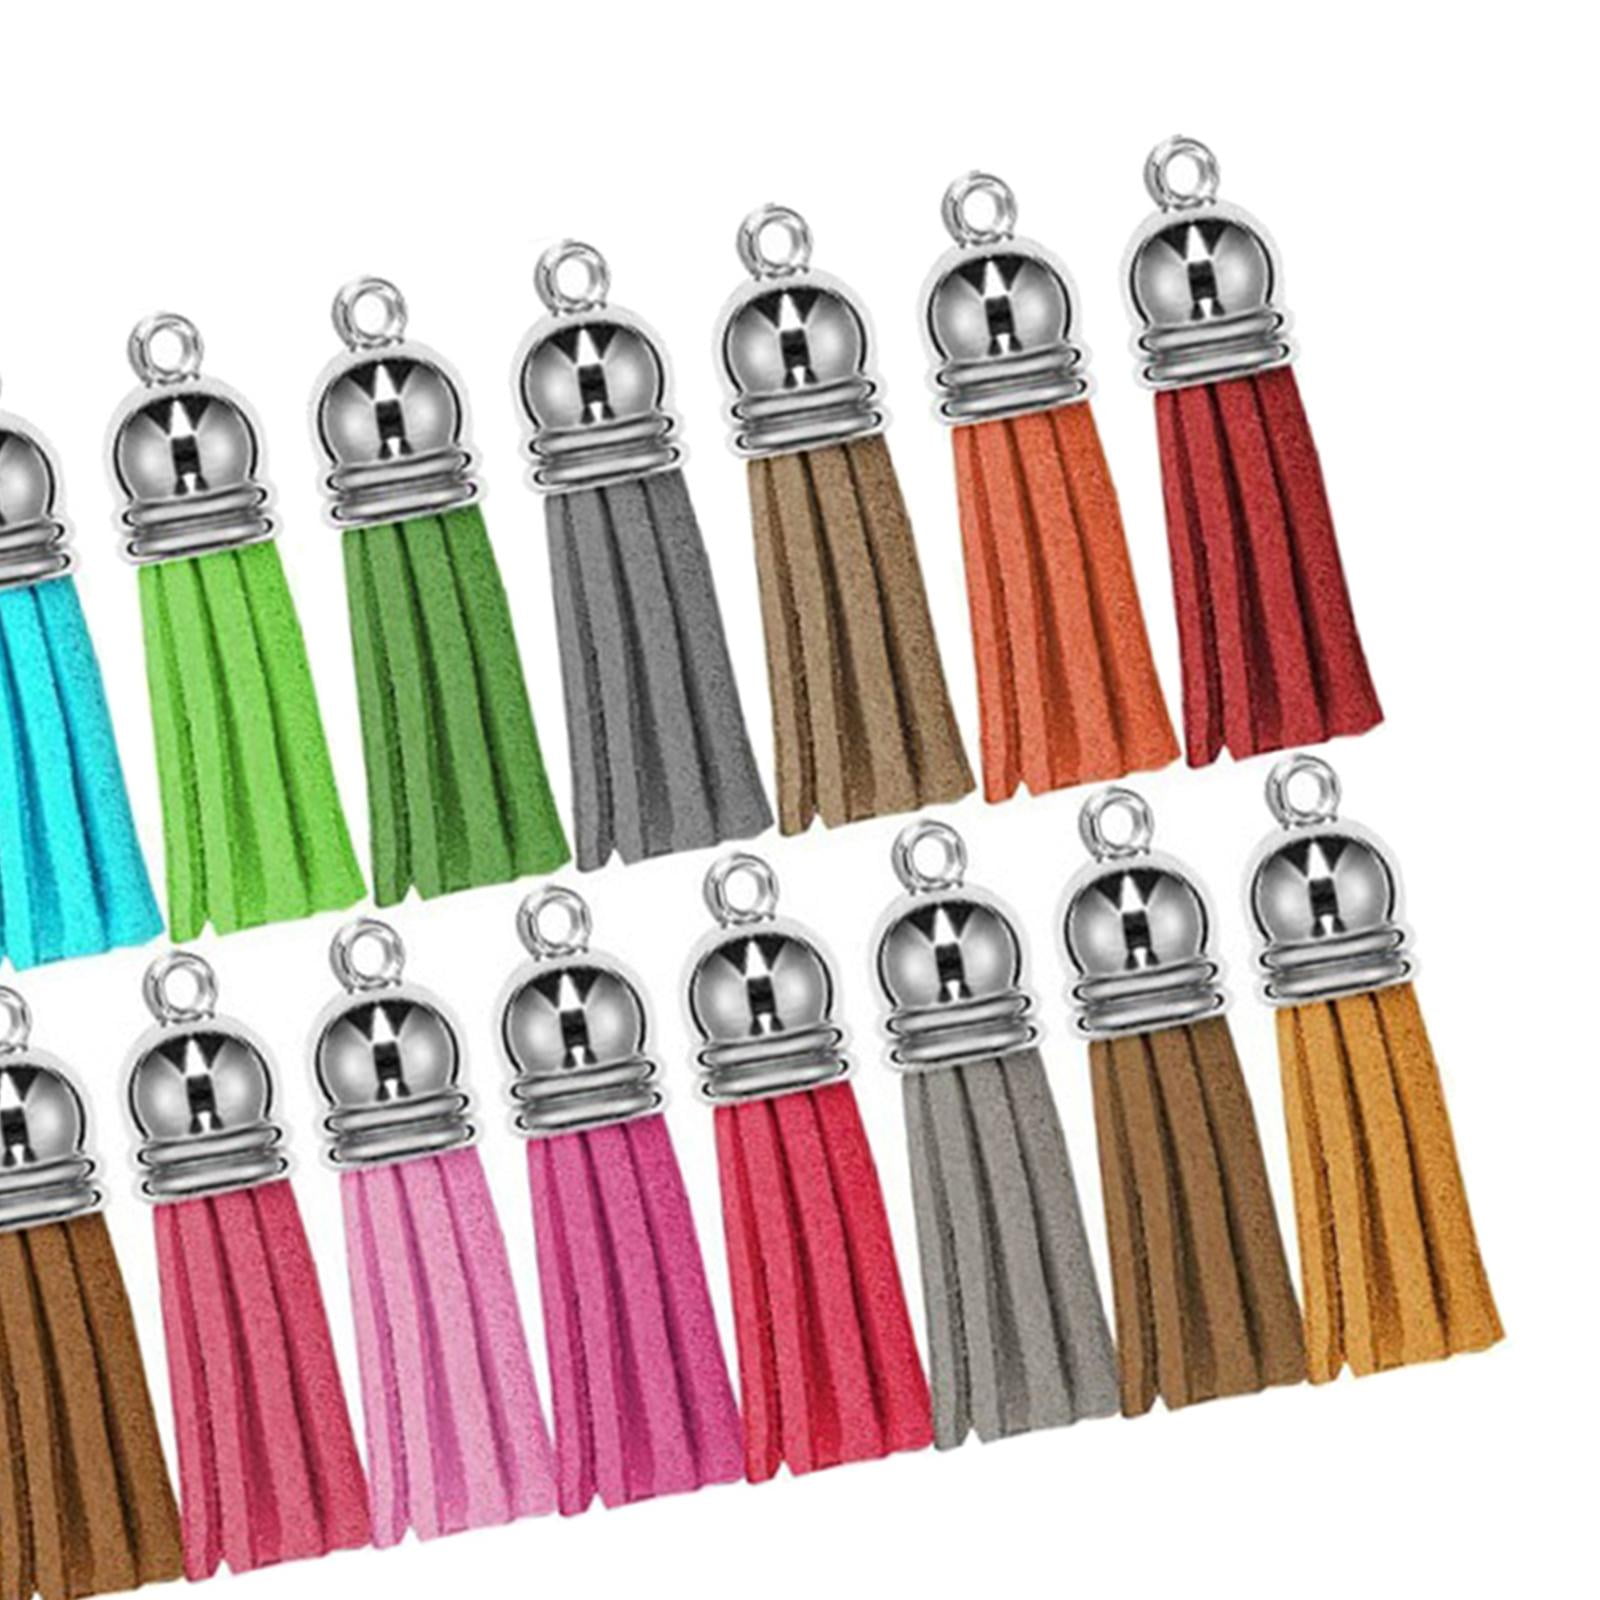 Duufin 200 Pieces Keychain Tassels Bulk Leather Tassel Pendants Colorful  Tassels for Keychain DIY and Craft (Gold and Silver)